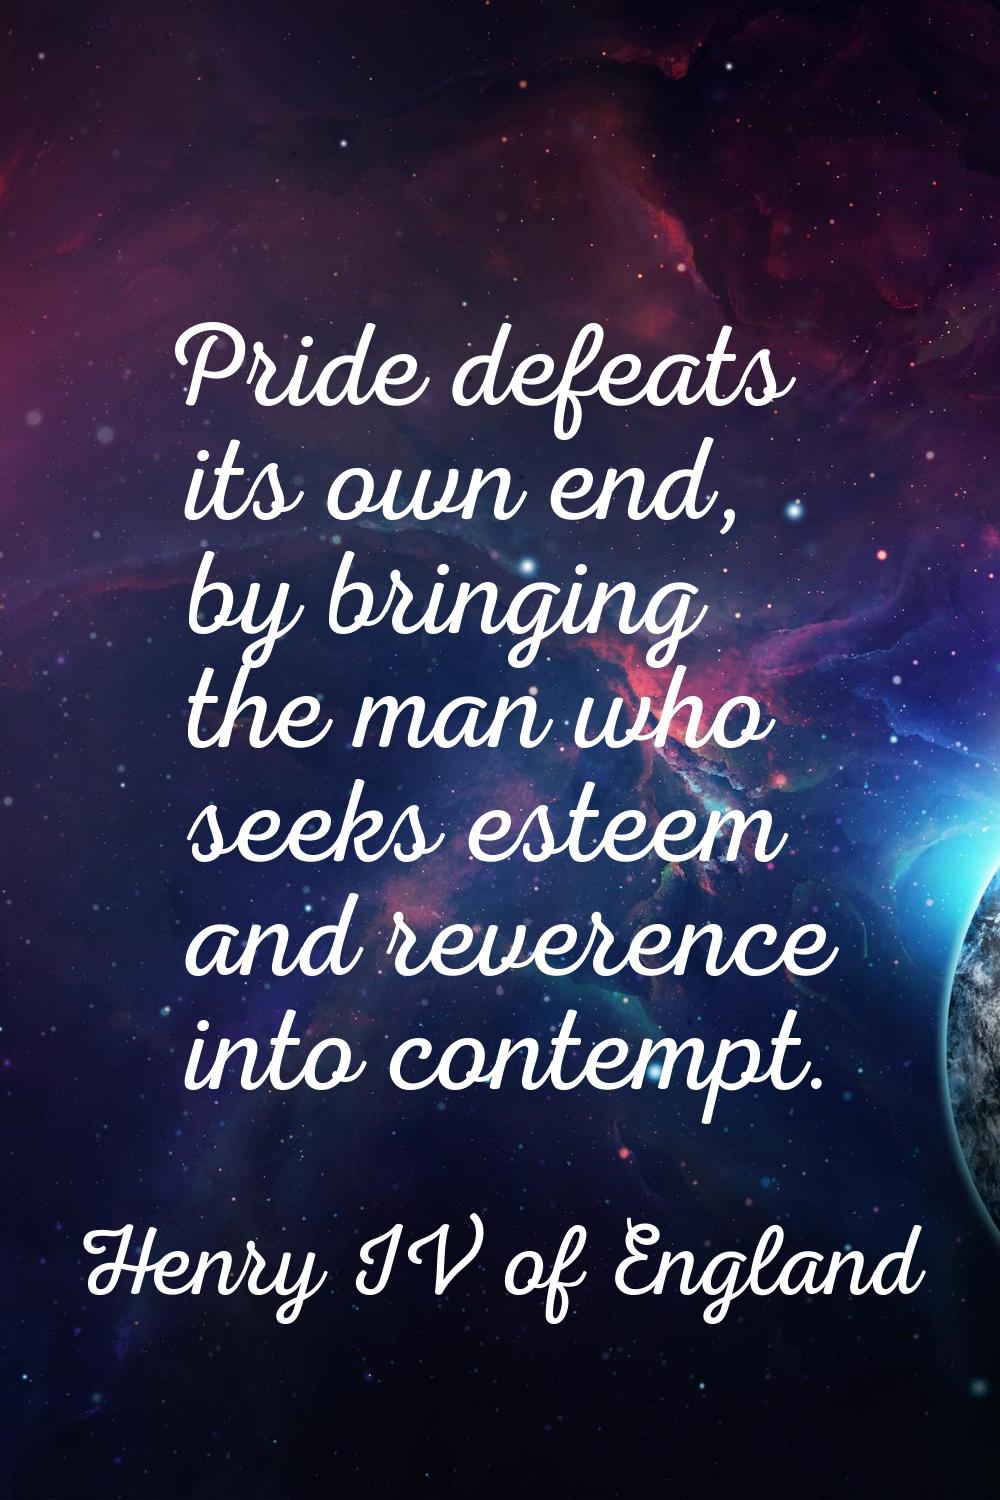 Pride defeats its own end, by bringing the man who seeks esteem and reverence into contempt.